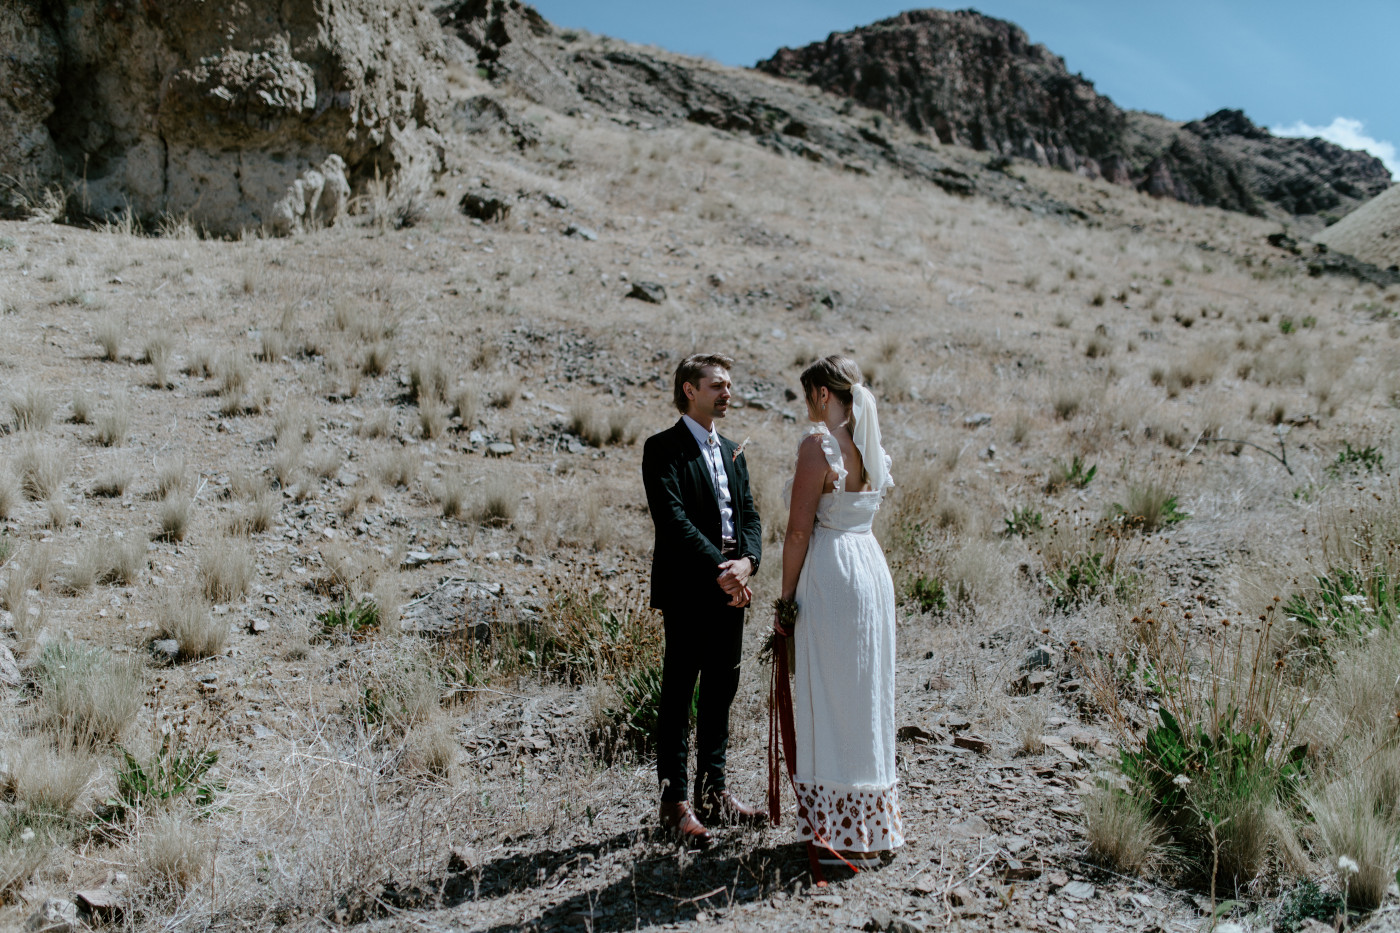 Greyson and Emily at their elopement spot. Elopement photography in the Central Oregon desert by Sienna Plus Josh.